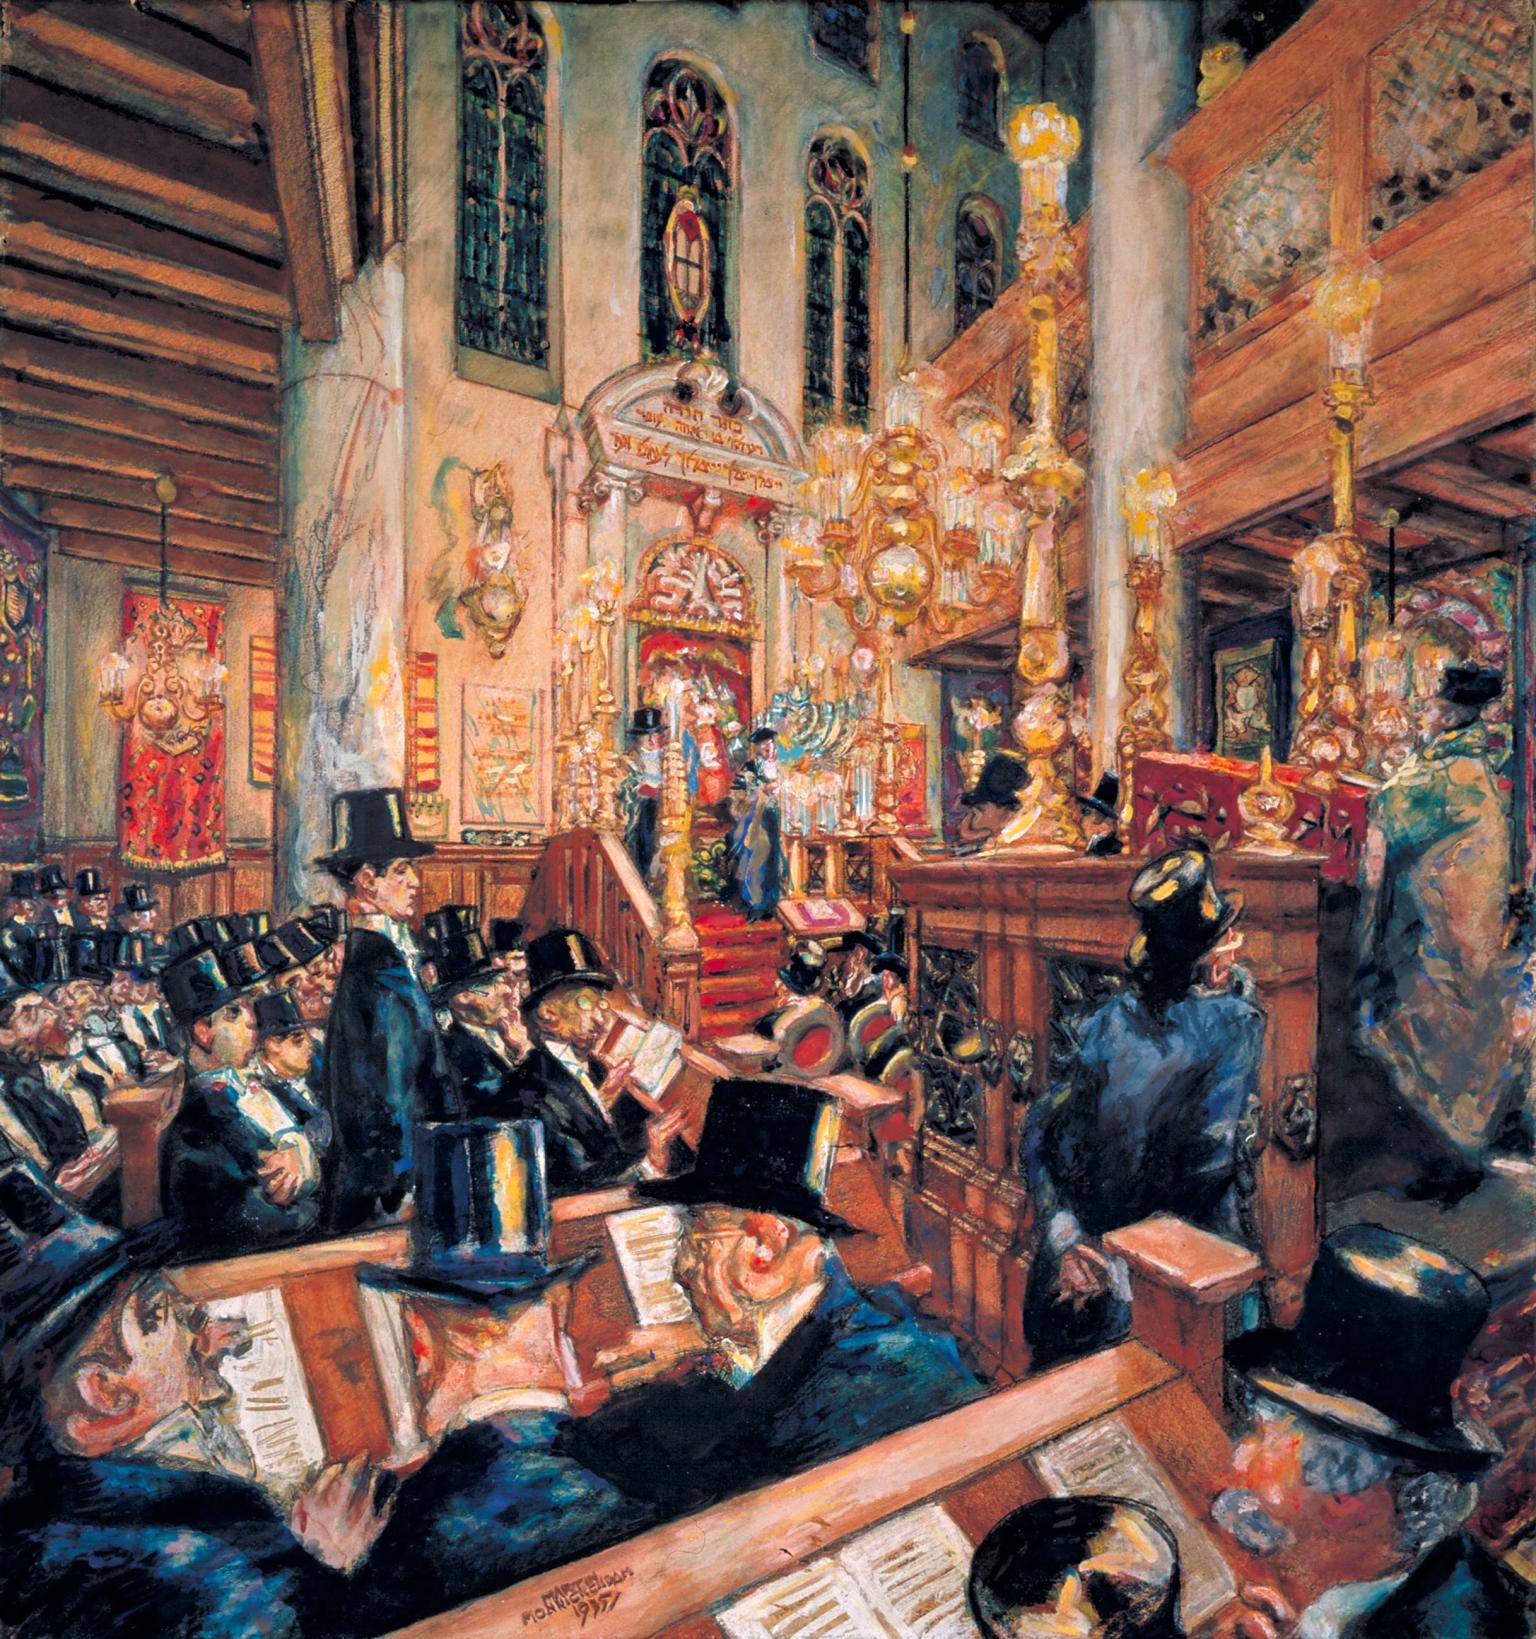 Painting of men wearing top hats seated and standing in crowded, decorated room with columns and Torah ark in background. 